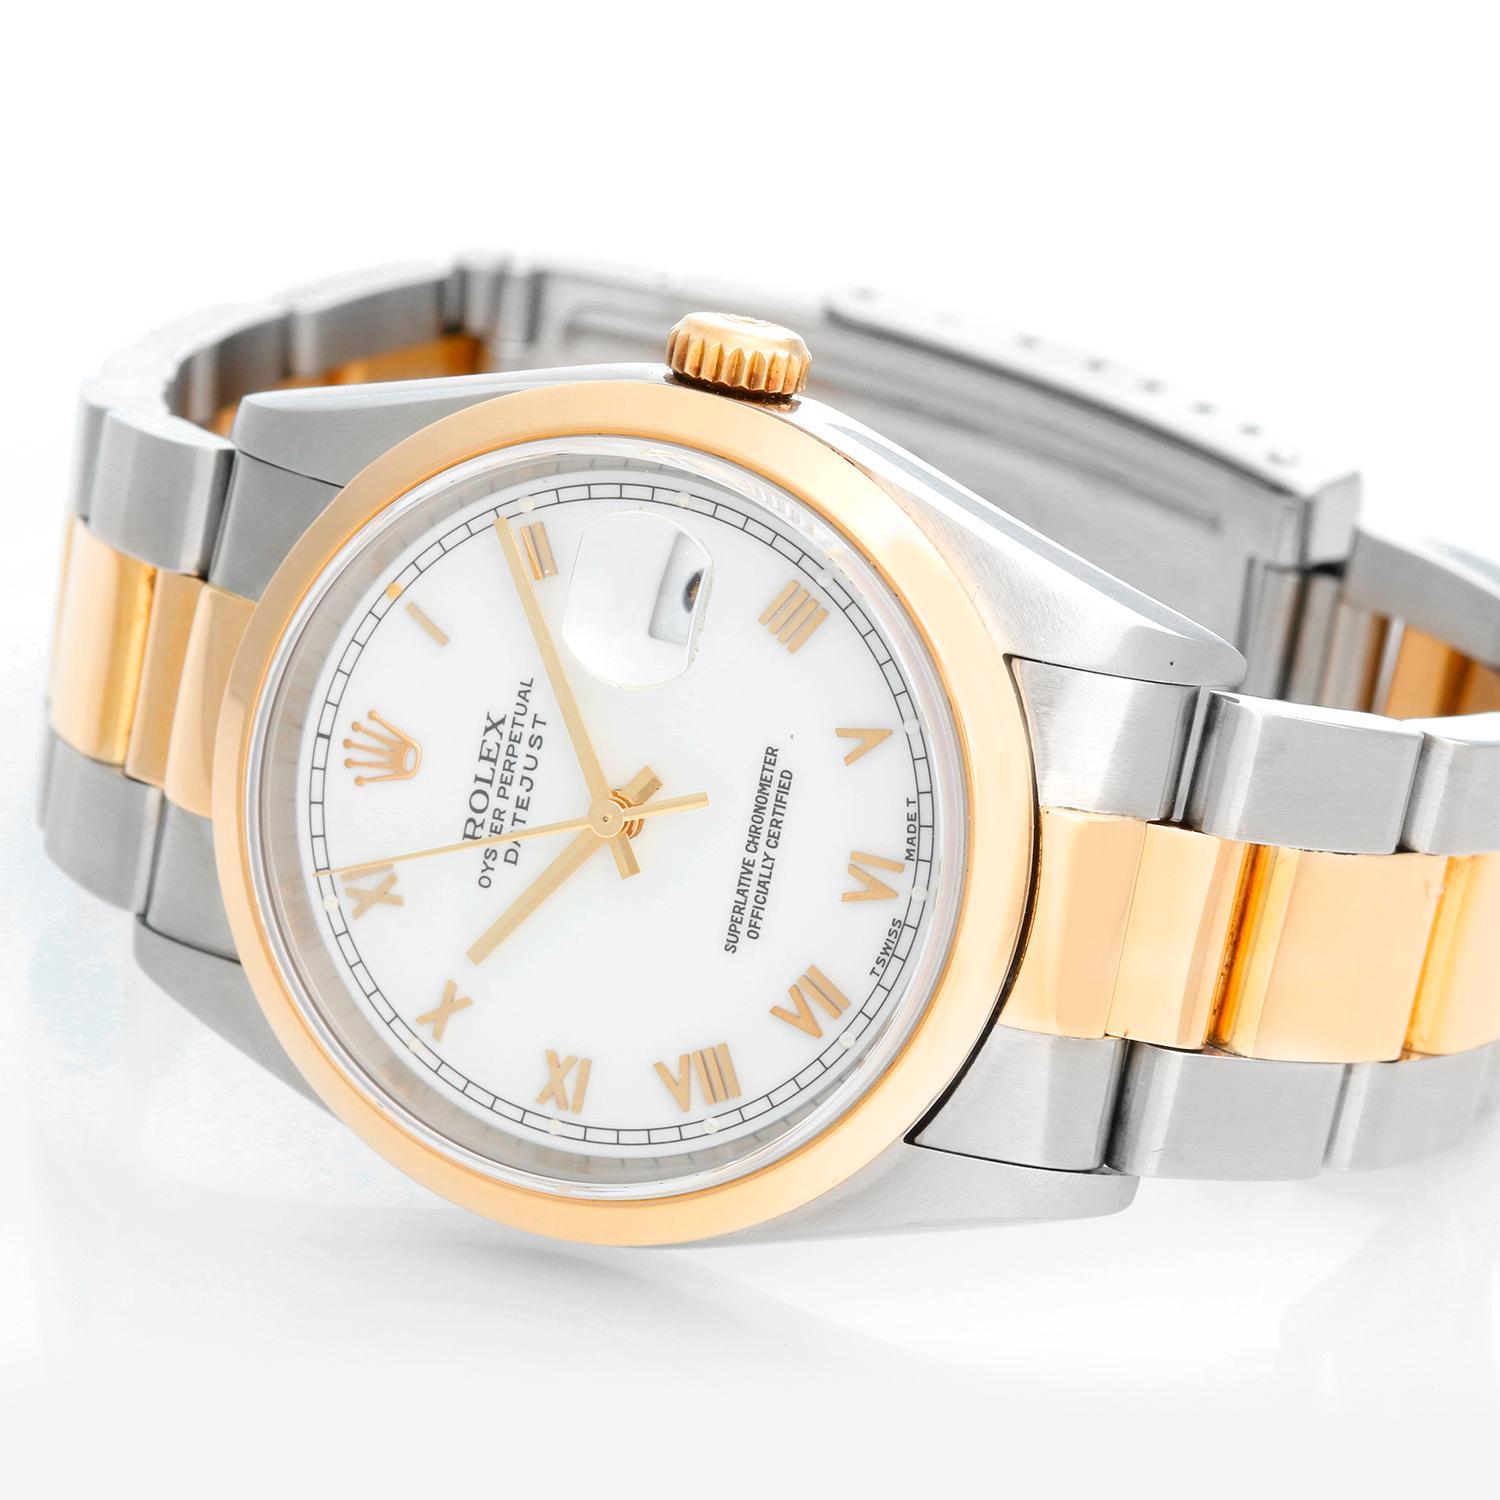 Men's Rolex Datejust 2-Tone Watch 16203 - Automatic winding, 27 jewels, Quickset, acrylic crystal. Stainless steel case with smooth bezel ( 36 mm ). White dial with yellow gold Roman numerals . Stainless steel and 18k yellow gold Oyster bracelet.